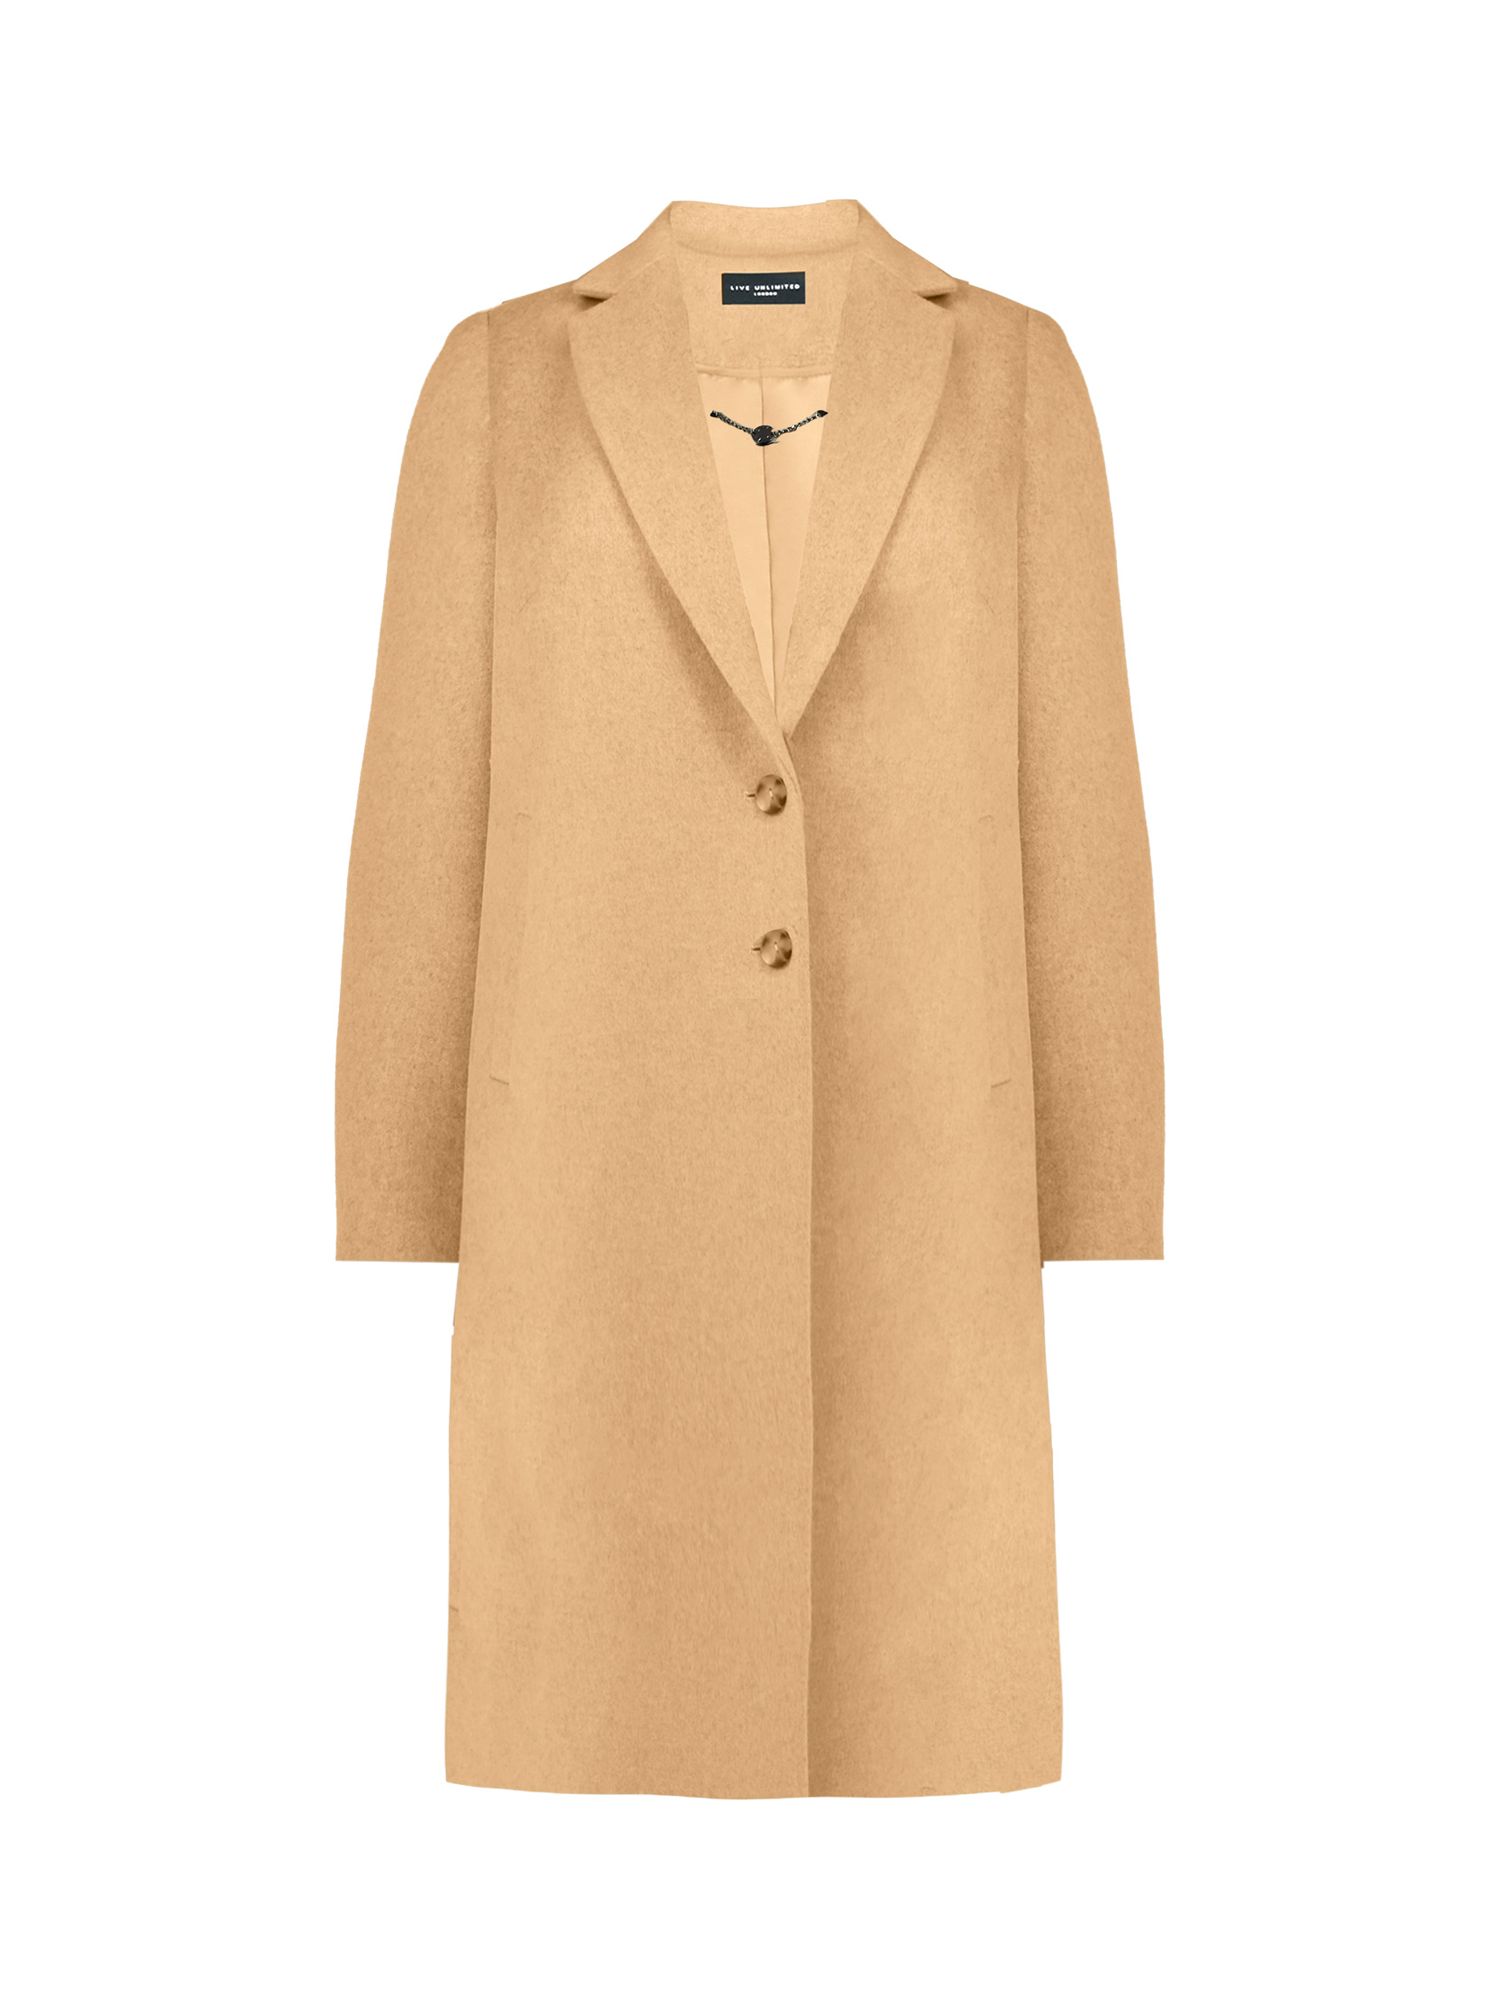 Buy Live Unlimited Curve Wool Blend Long Tailored Coat Online at johnlewis.com